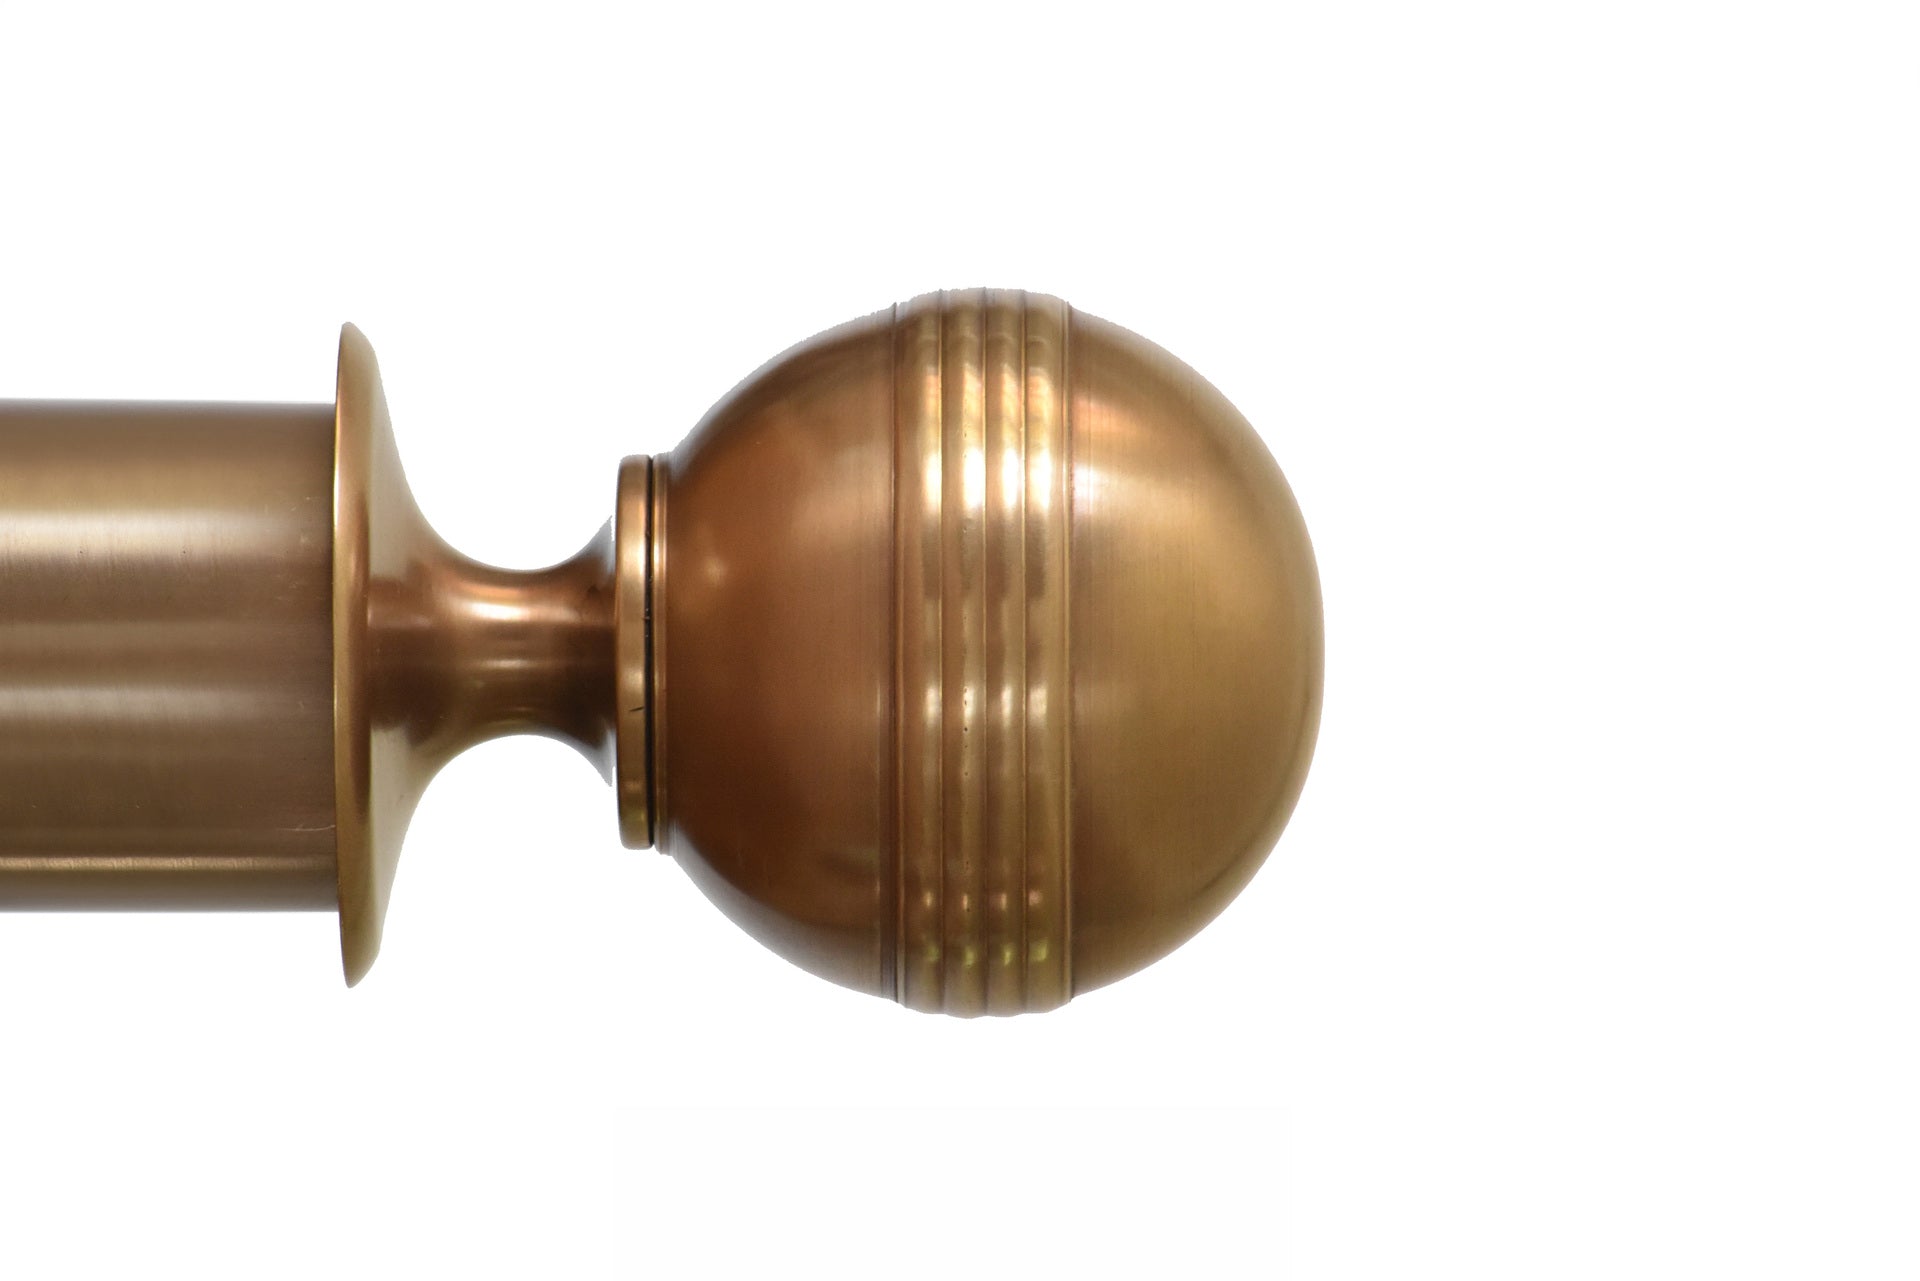 Tillys Classic Four Rib Ball Finial Curtain Pole Set in Antique Brass